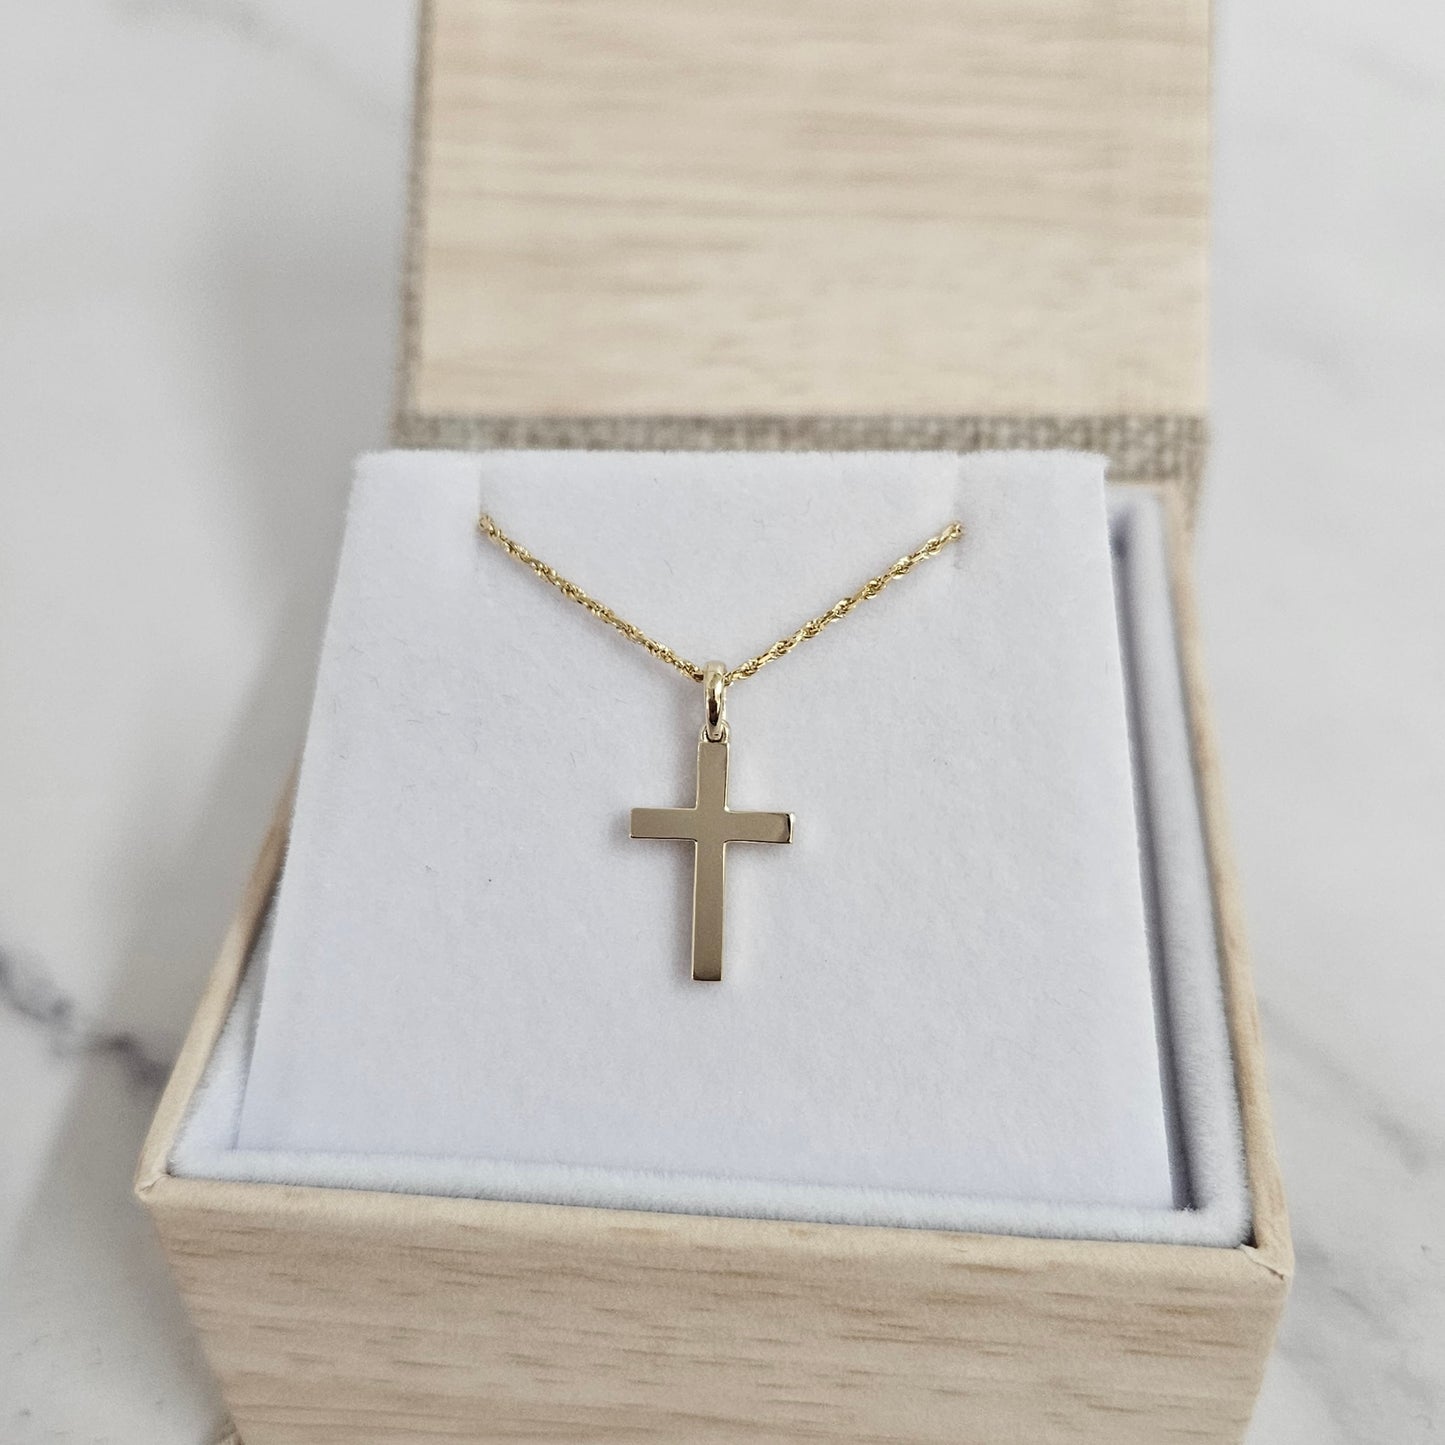 Men's Gold Cross Necklace/14k Gold Filled rope Chain/Gifts for Men/Engagement/confirmation/Men's small Gold Cross Pendant